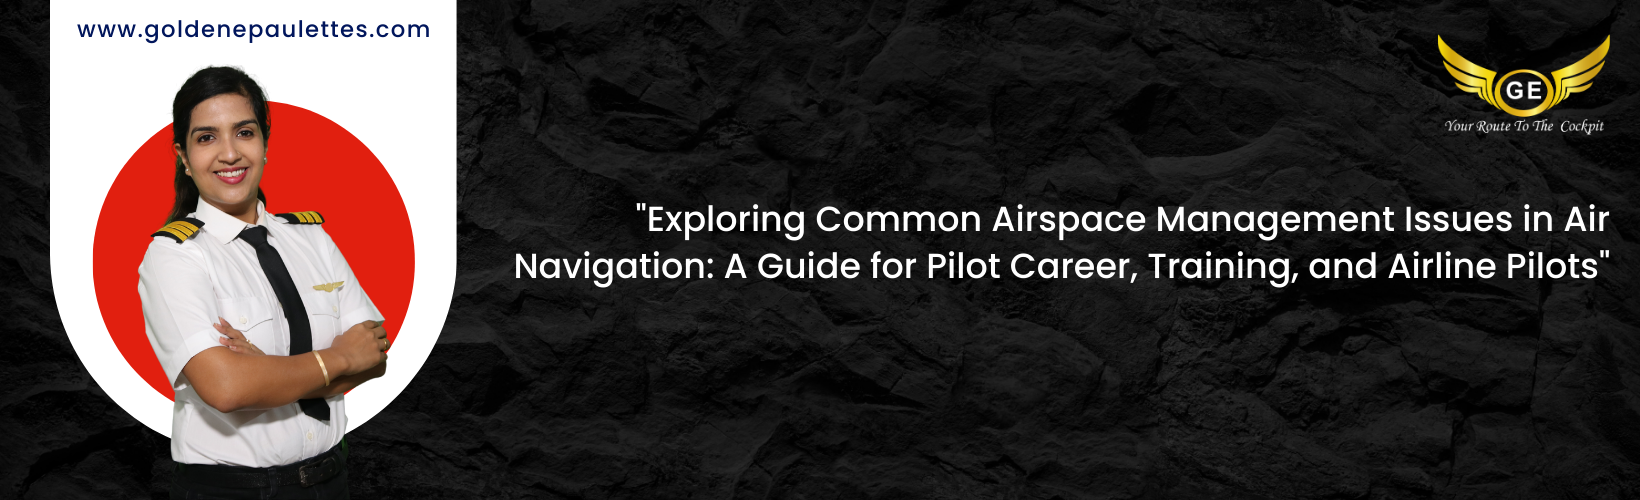 Common Airspace Management Issues in Air Navigation